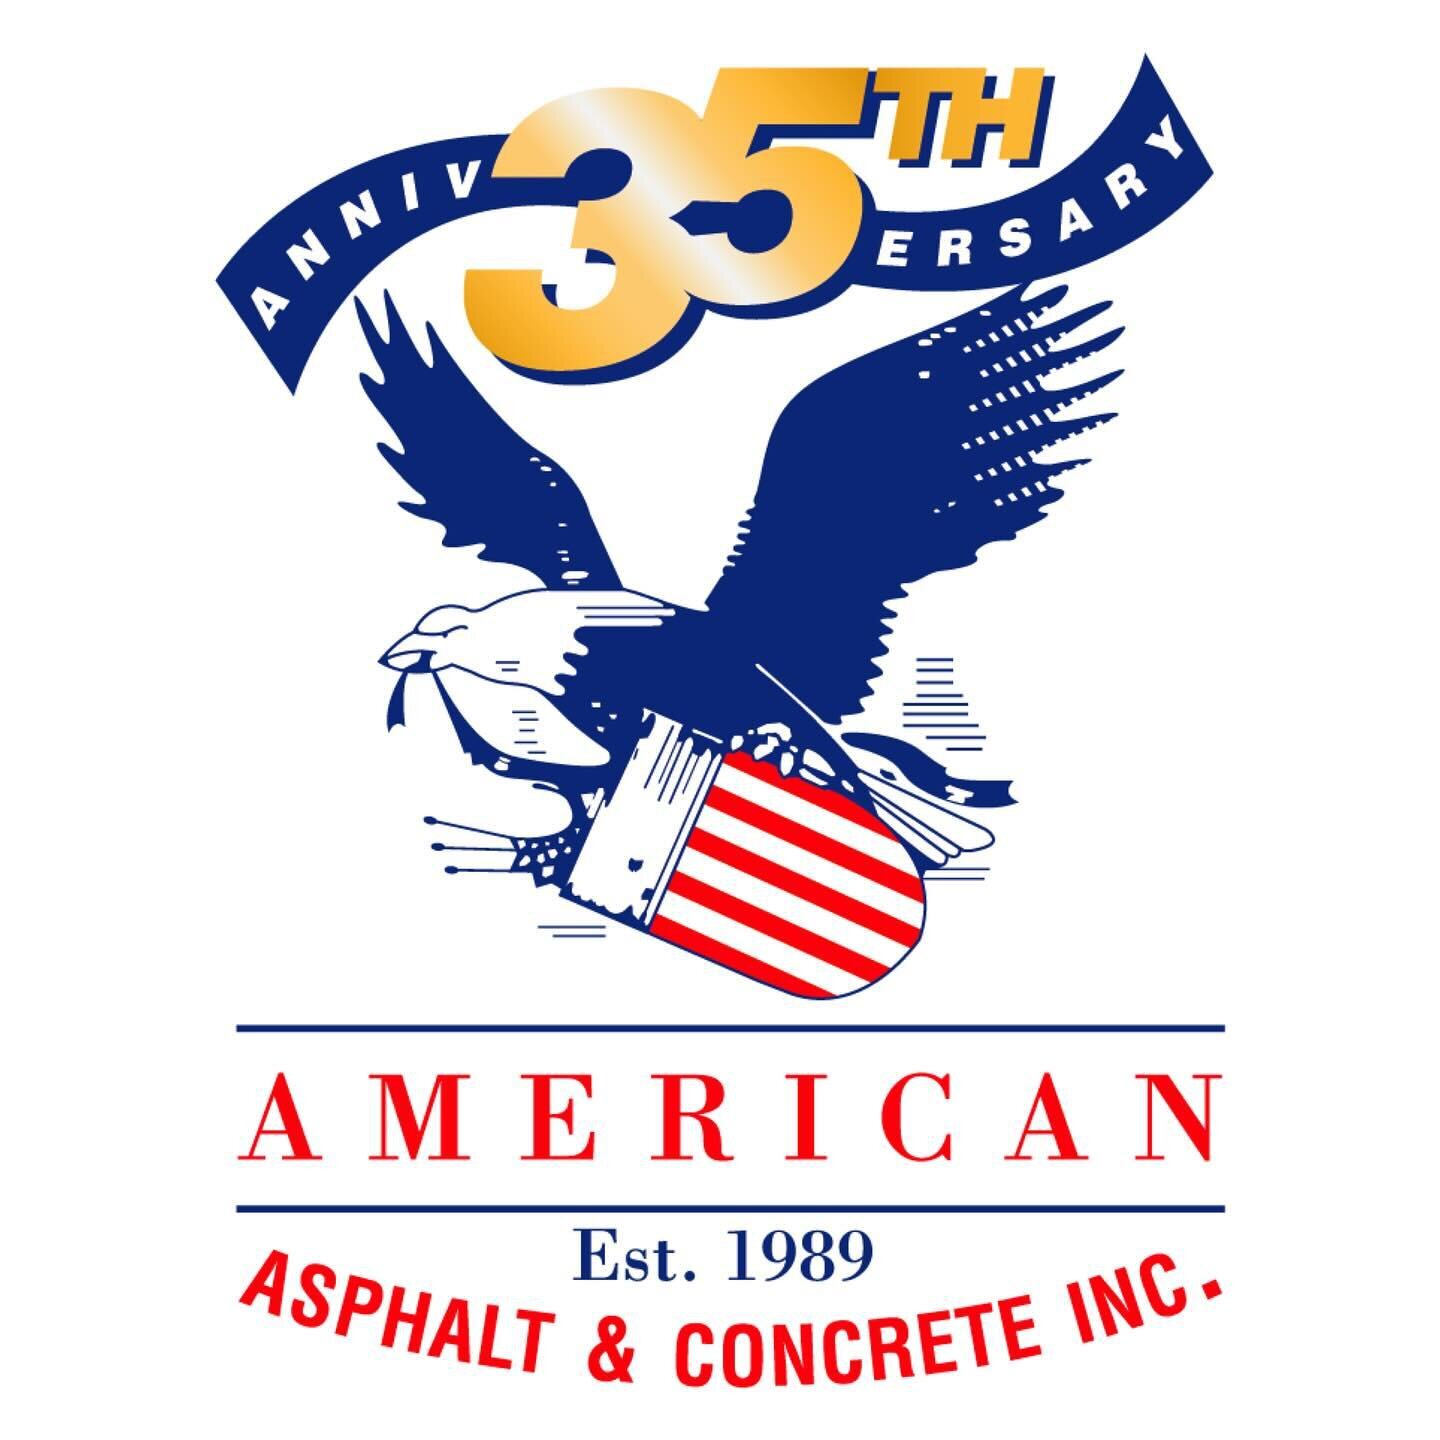 This year marks 35 years of American Asphalt &amp; Concrete! 🎉 In honor of this milestone, we have brought back the vintage AAC logo for the year. And each month we will be sharing a project from throughout our history. Make sure to follow us so you